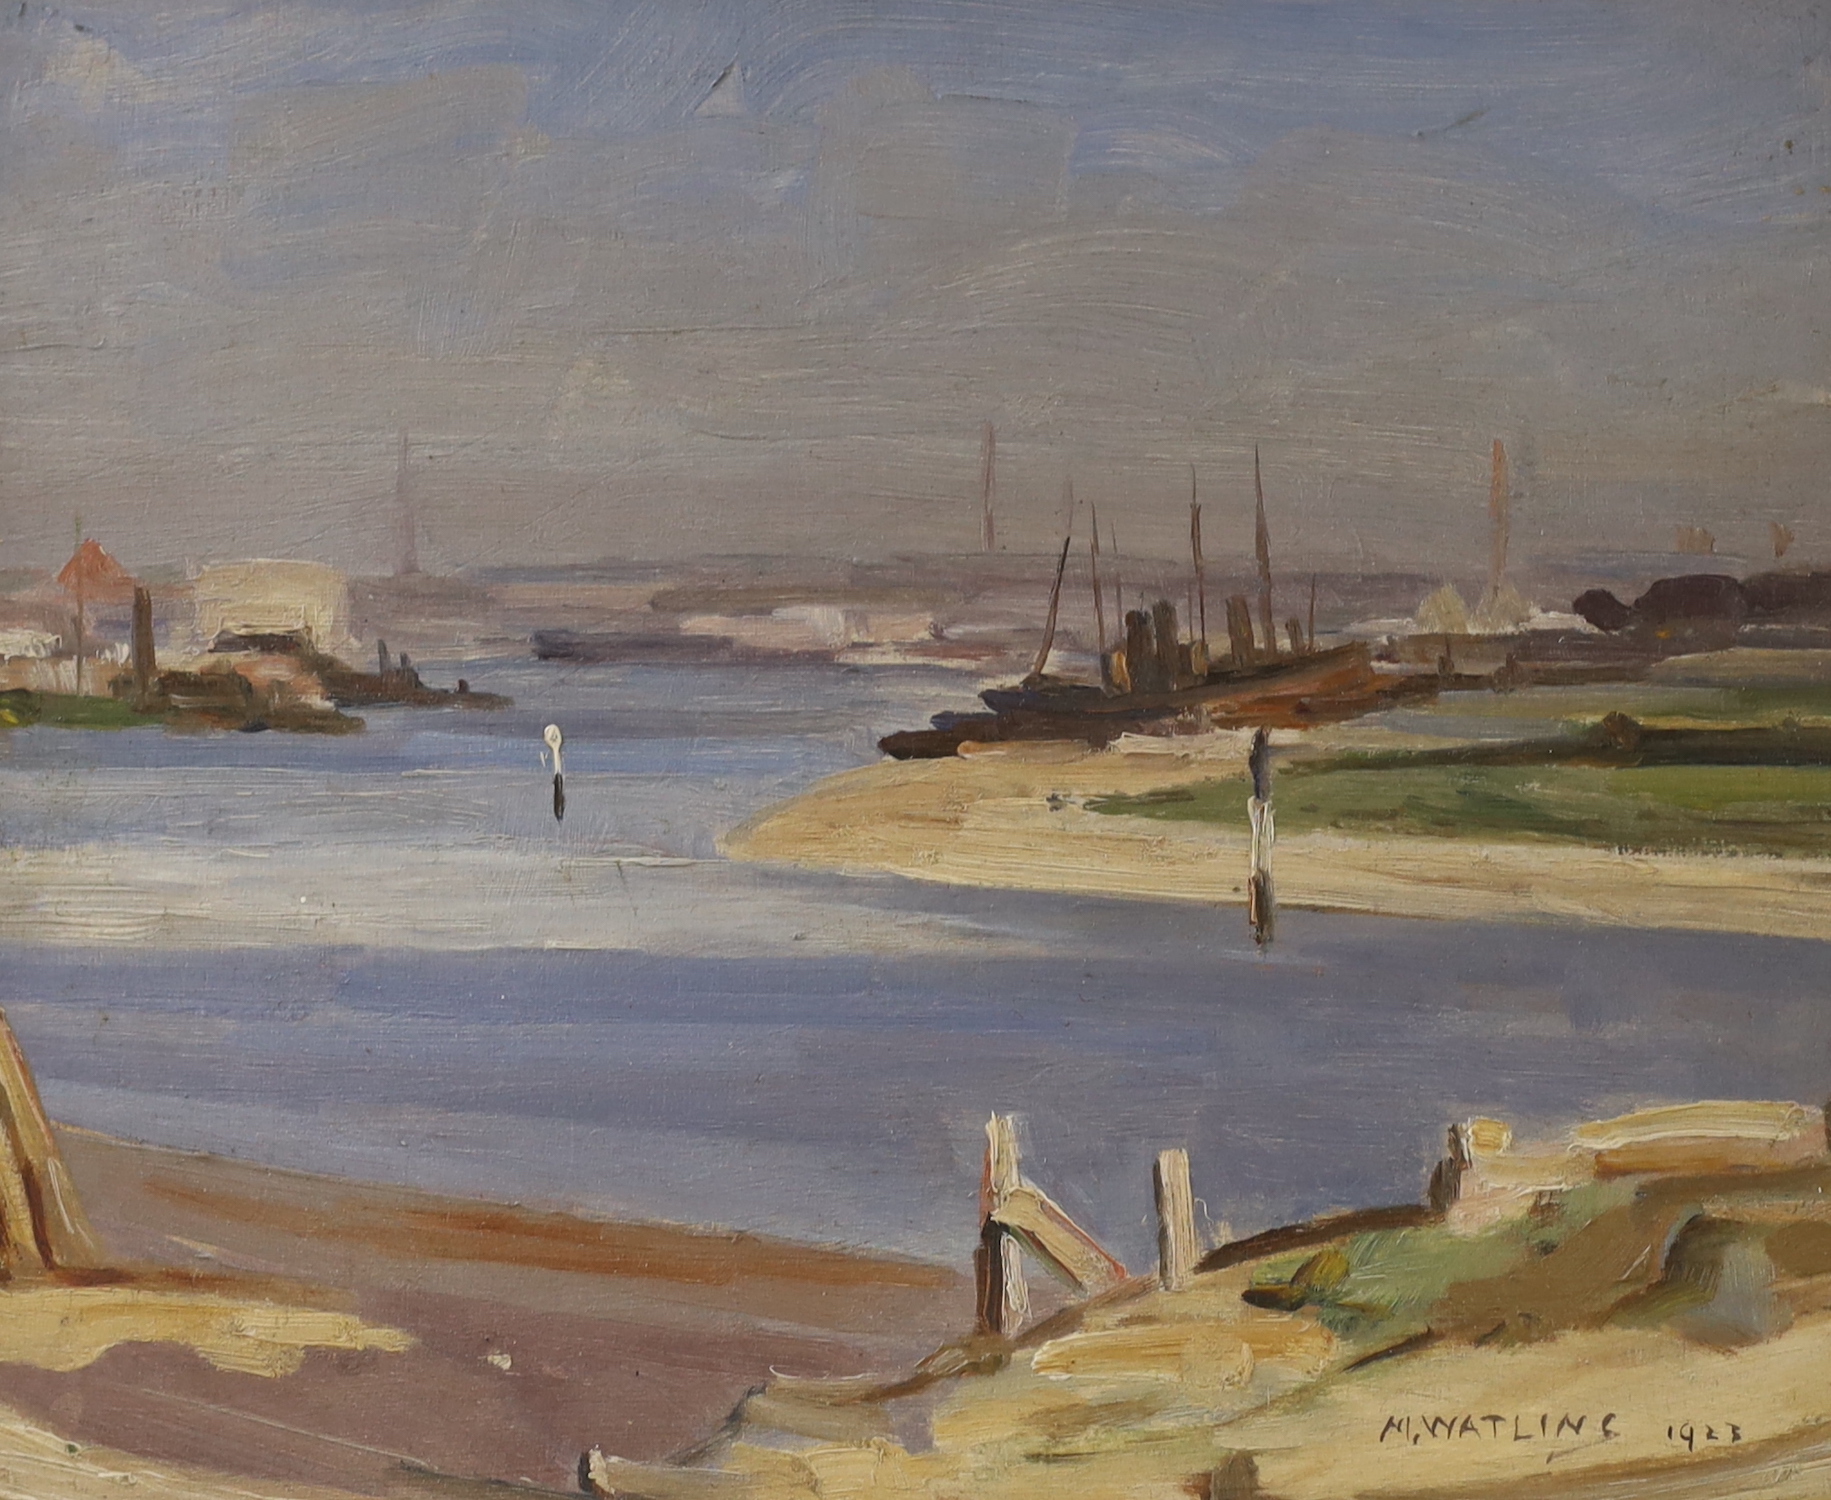 Meredith Watling (20th century) Impressionist oil on board, 'Oulton Broad looking towards Yarmouth', signed and dated 1923, 26 x 21cm